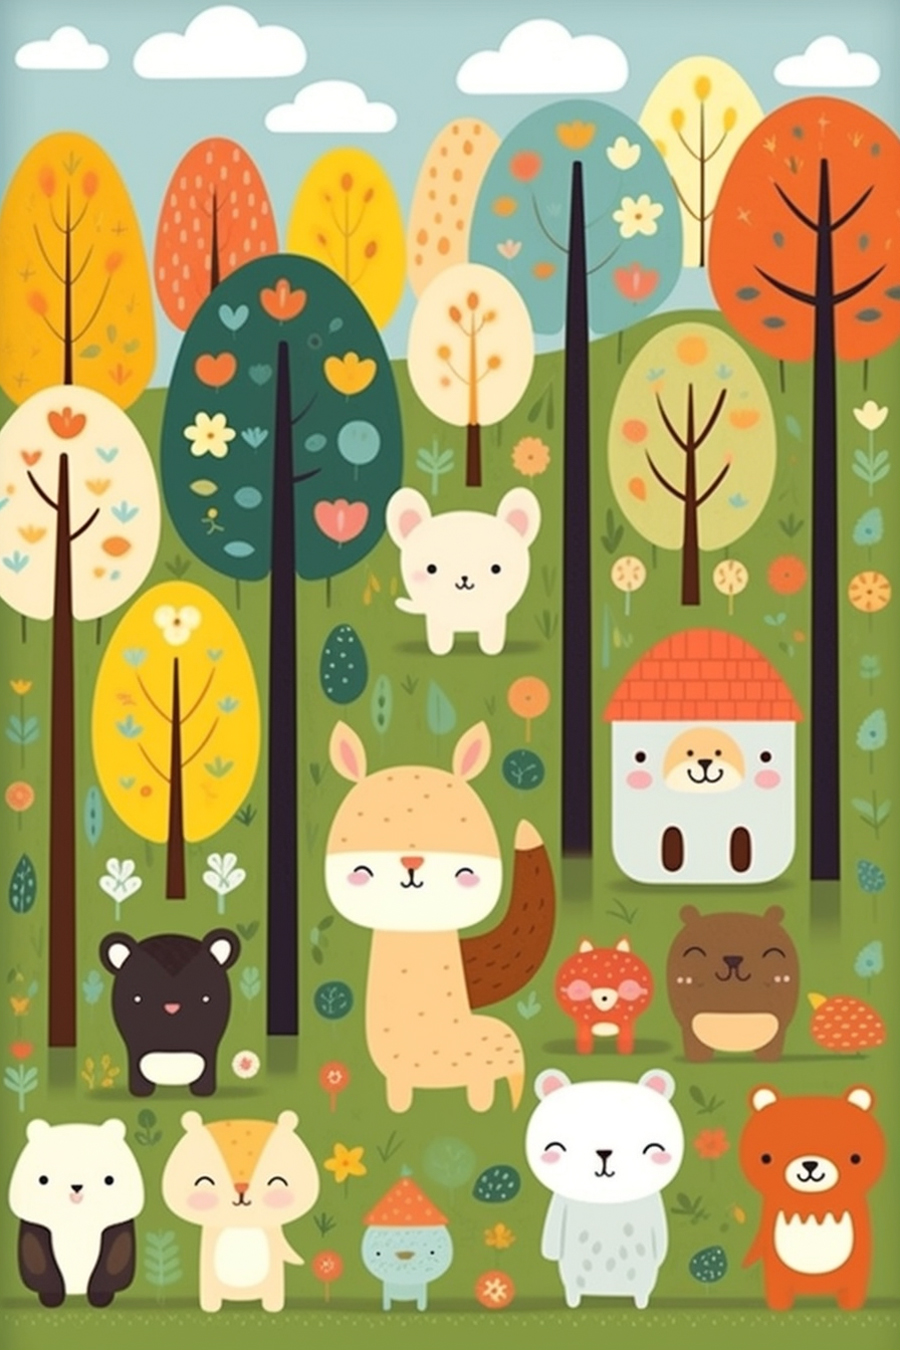 Cute cartoon animals in the forest.